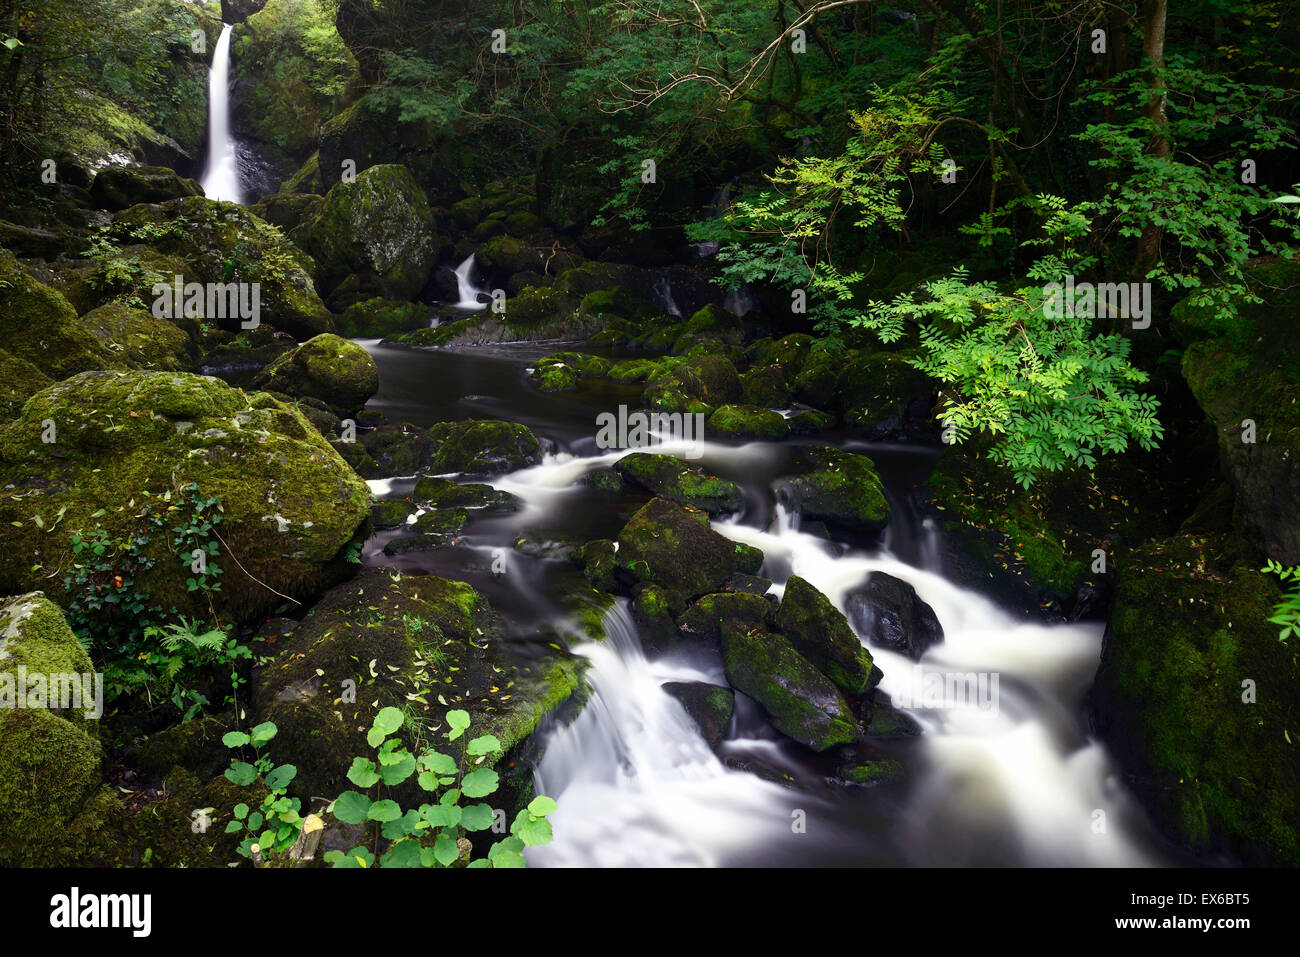 The Devils Punchbowl waterfall river vartry Devils Glen County Wicklow RM Ireland Stock Photo